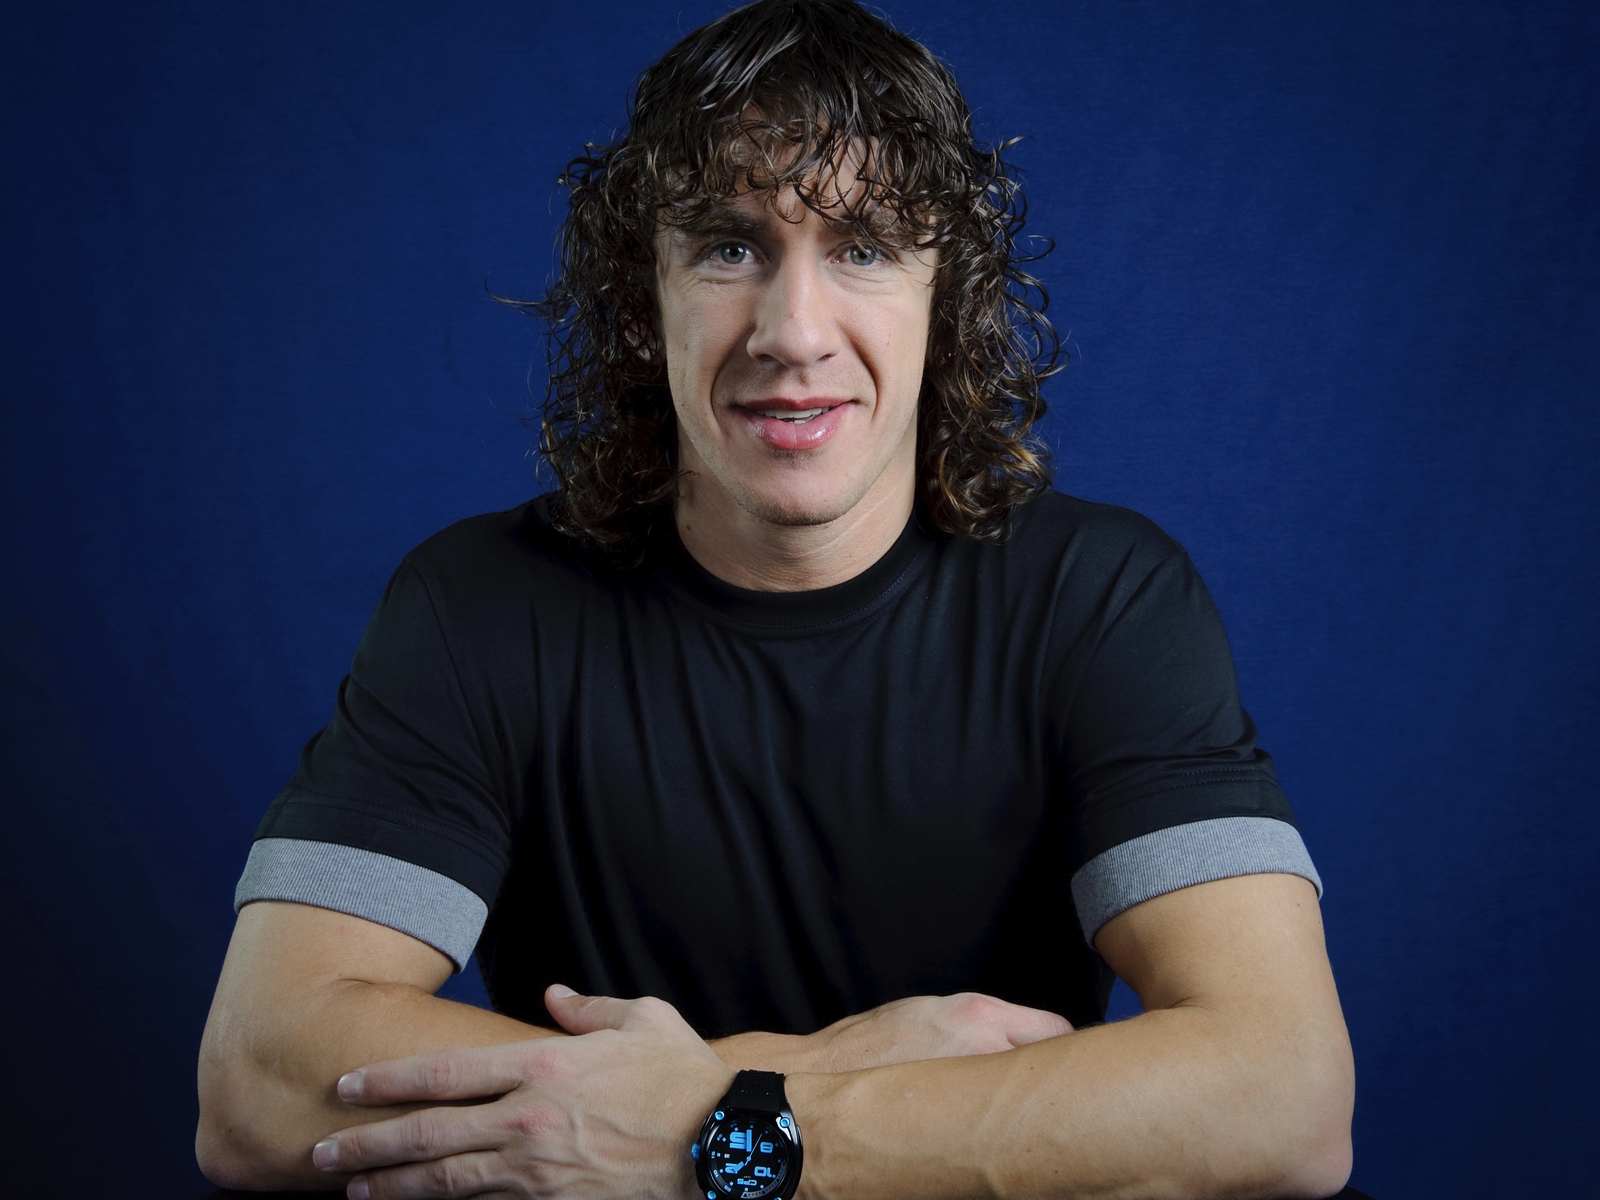 Carles Puyol Smile for 1600 x 1200 resolution